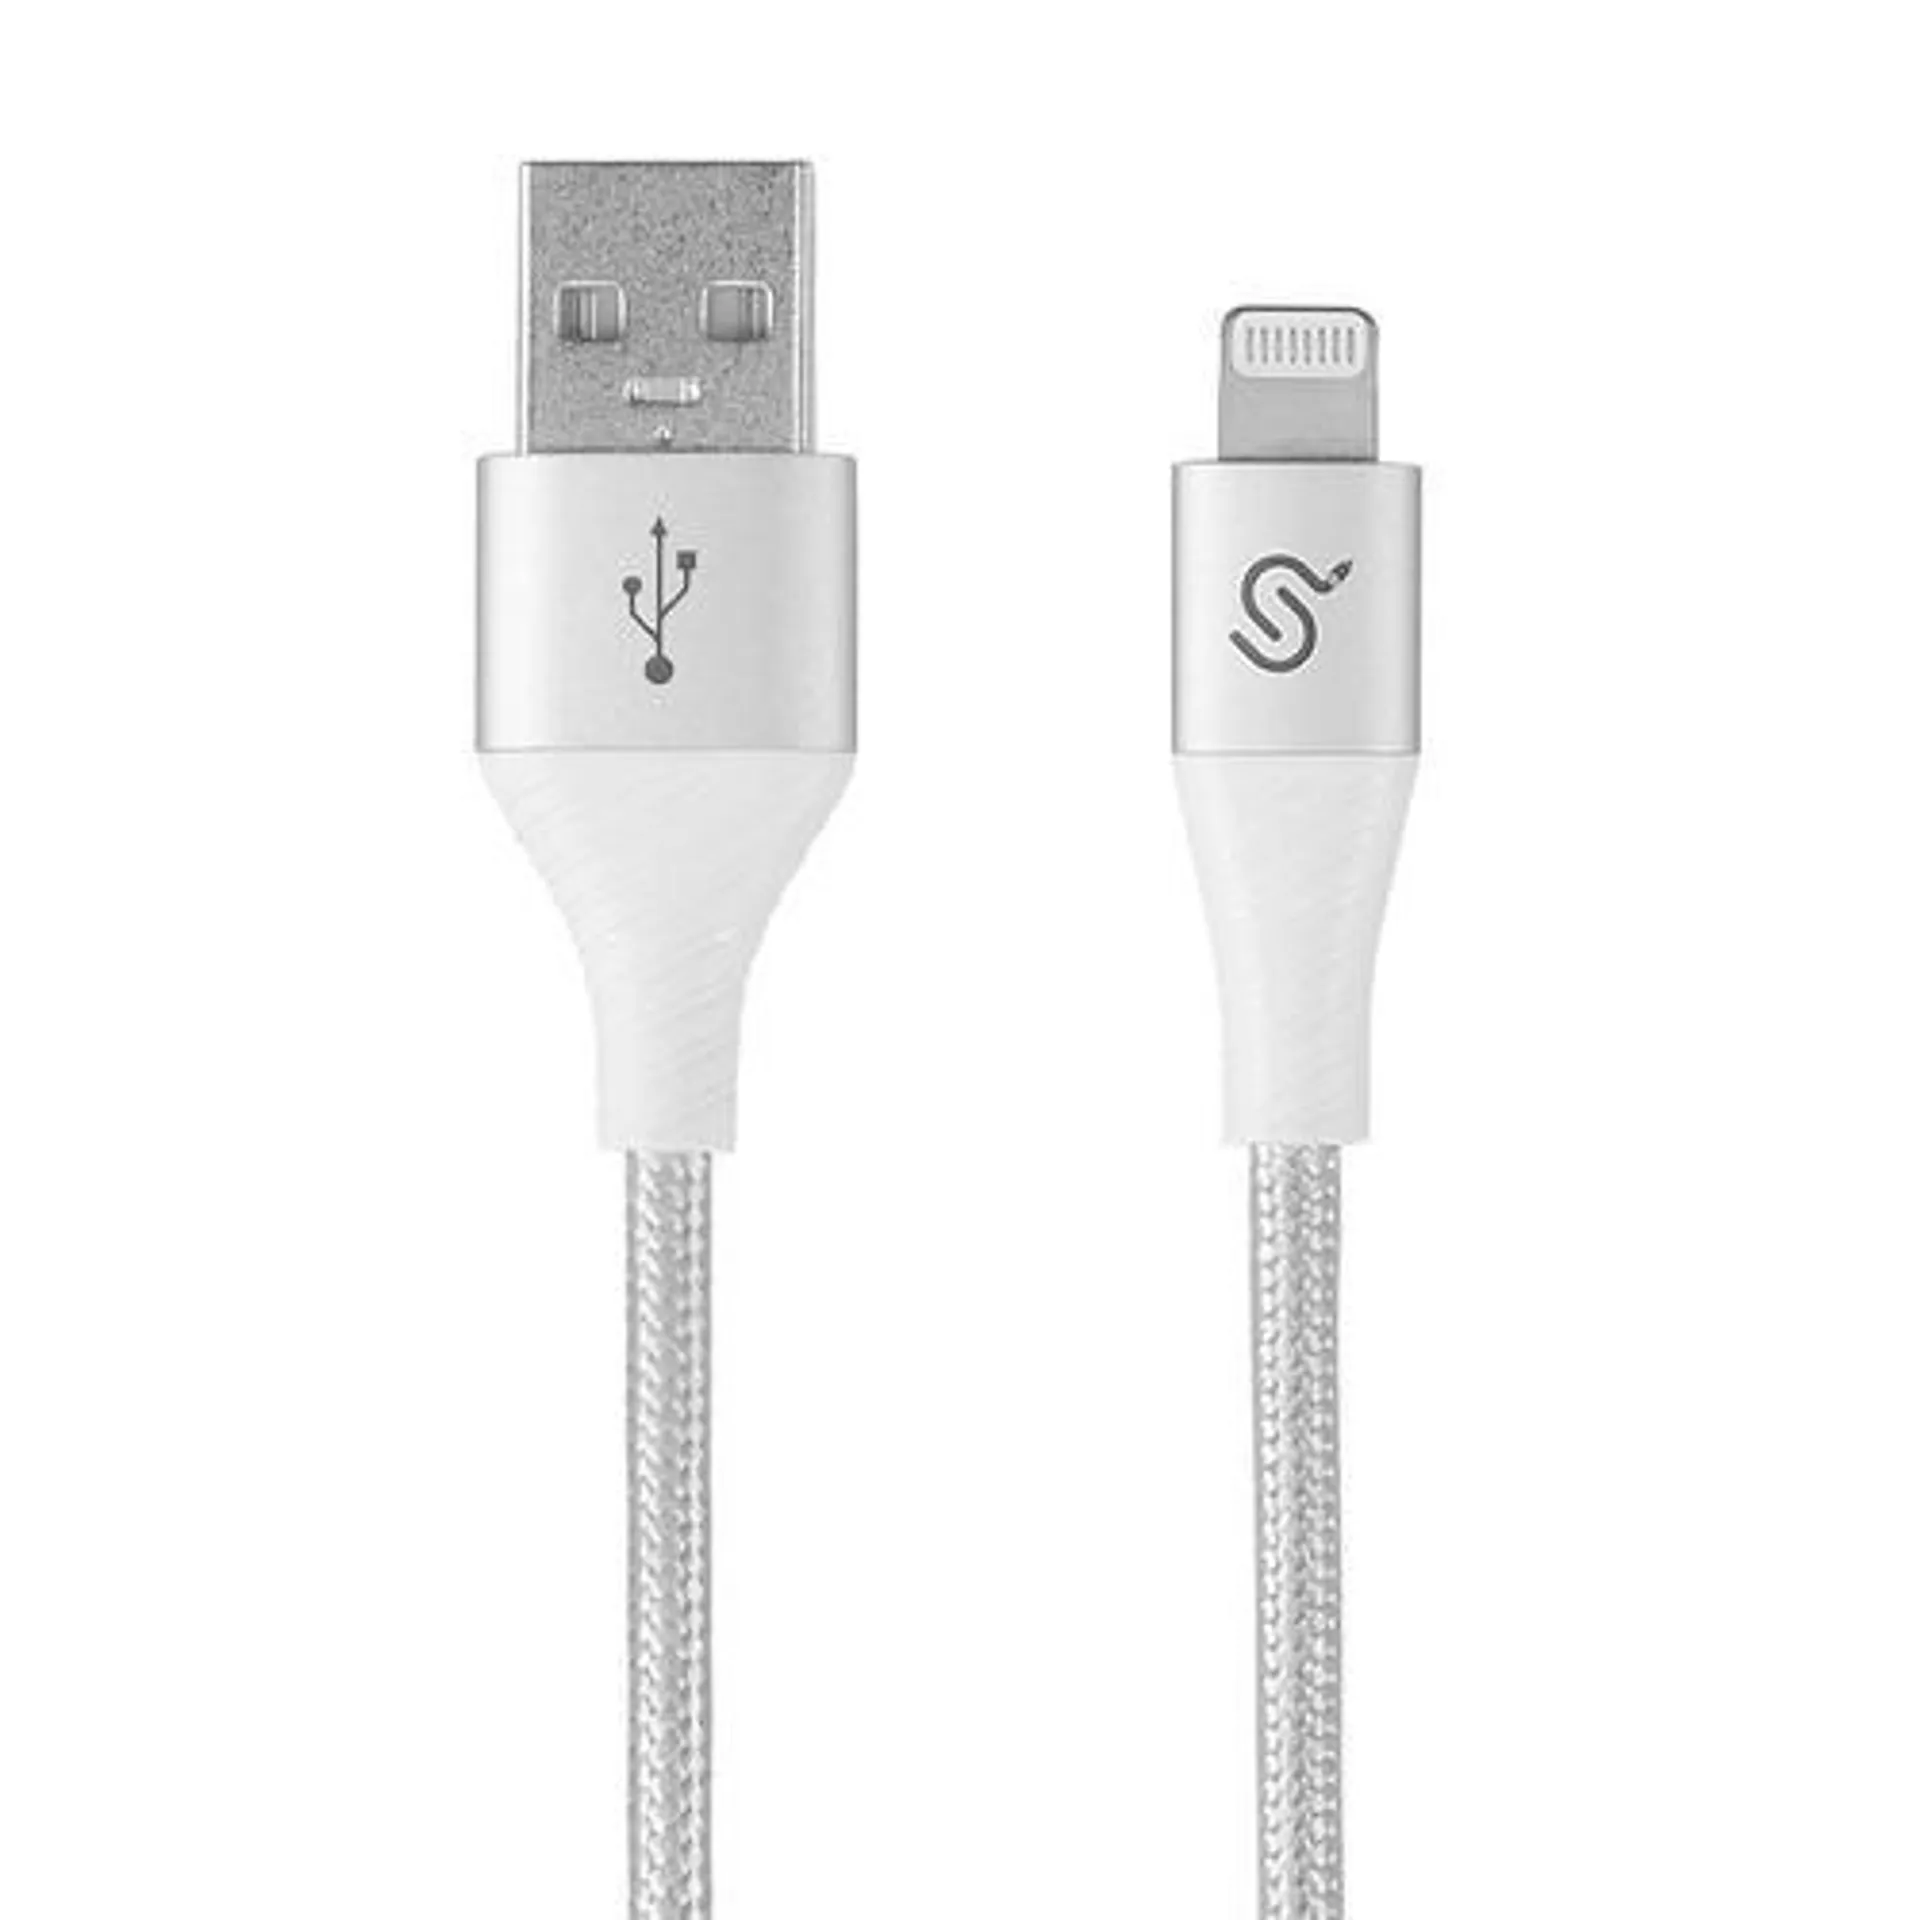 Nylon Braided Lightning Cable Apple MFi Certified For iPhone iPad-3 FT (1m), Silver - PrimeCables® - 1/Pack